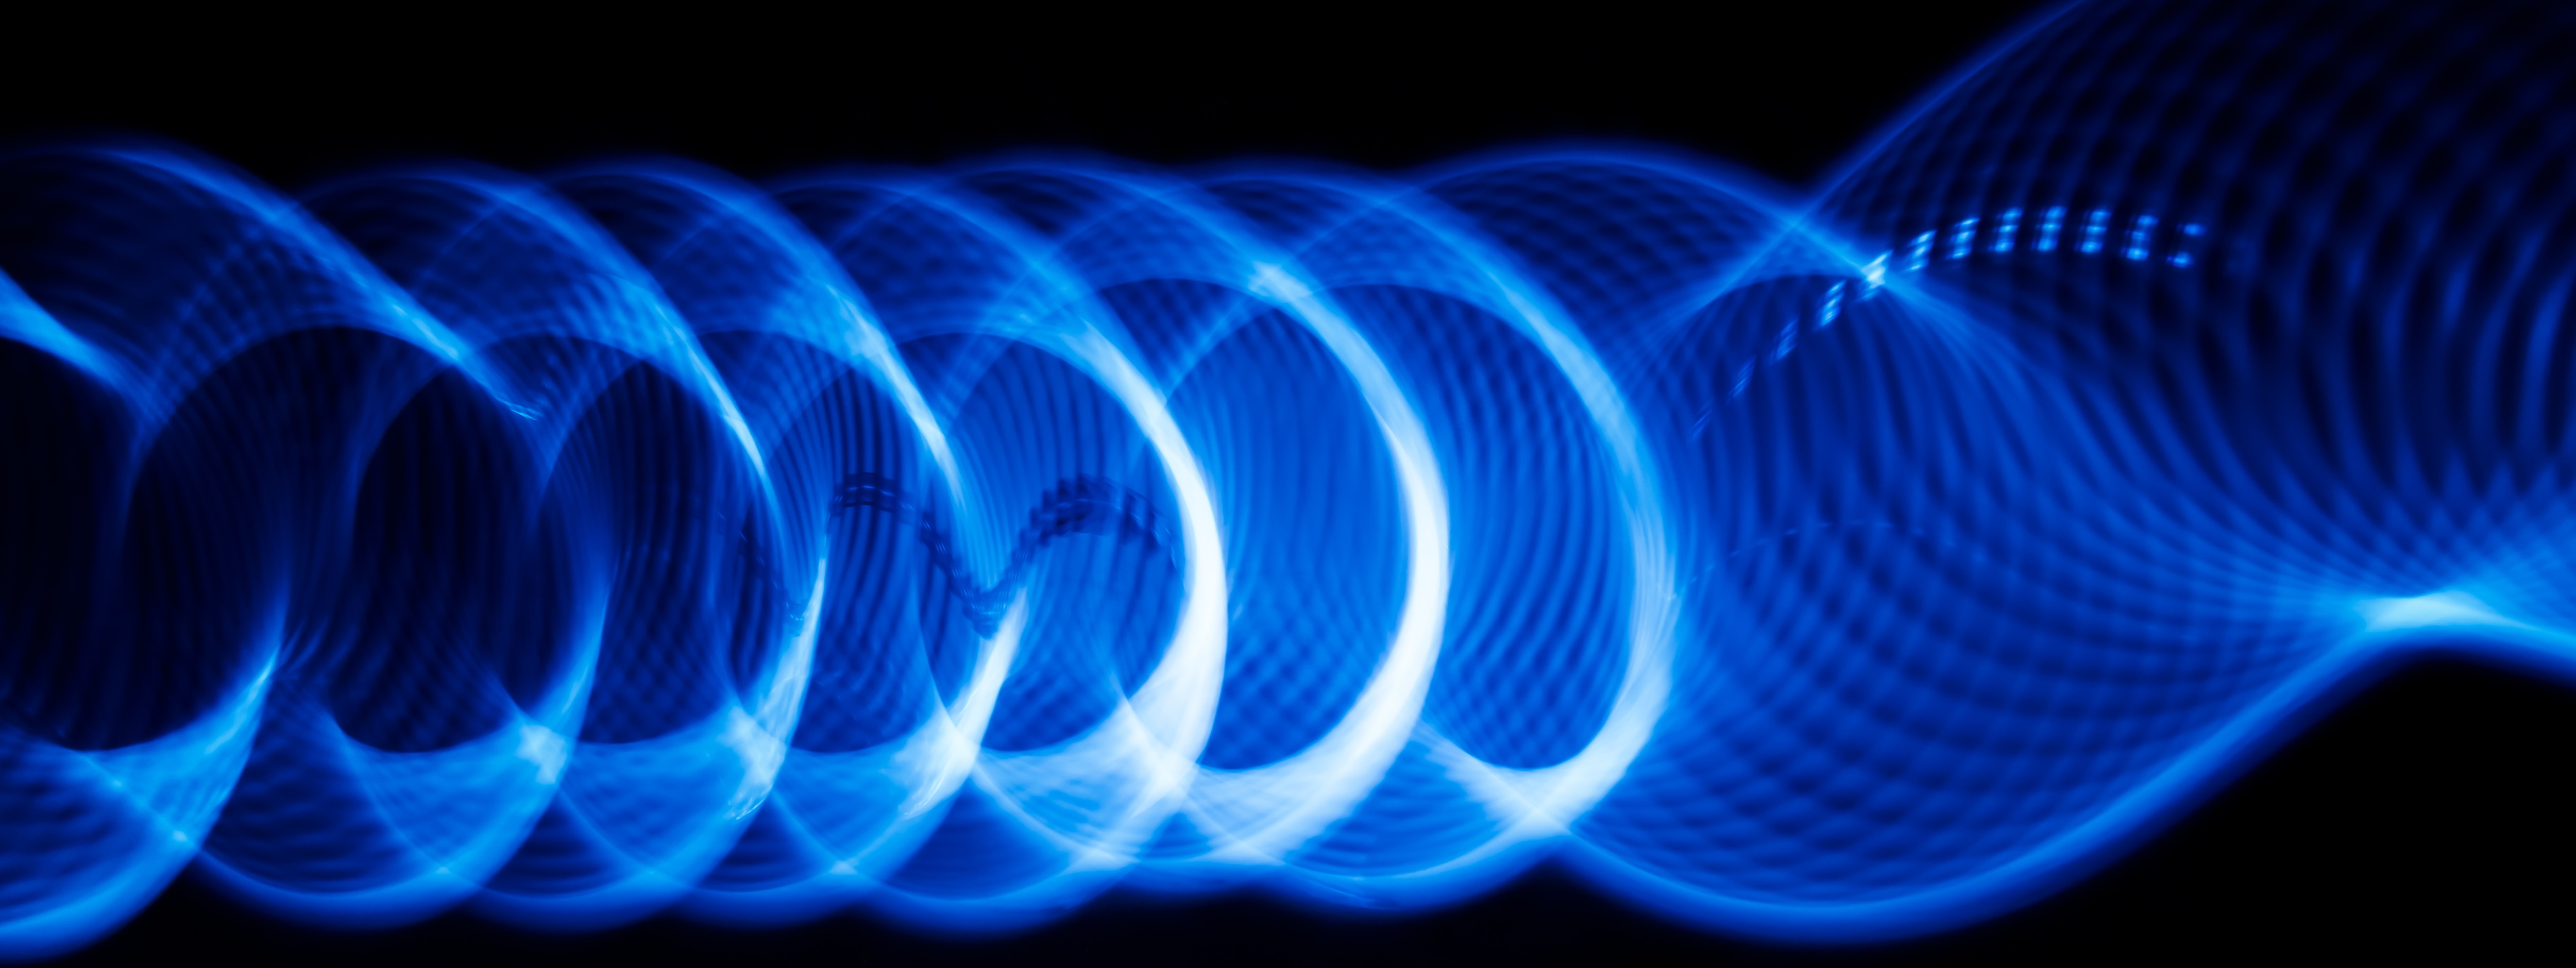 Light, sound, action extending the life of acoustic waves on